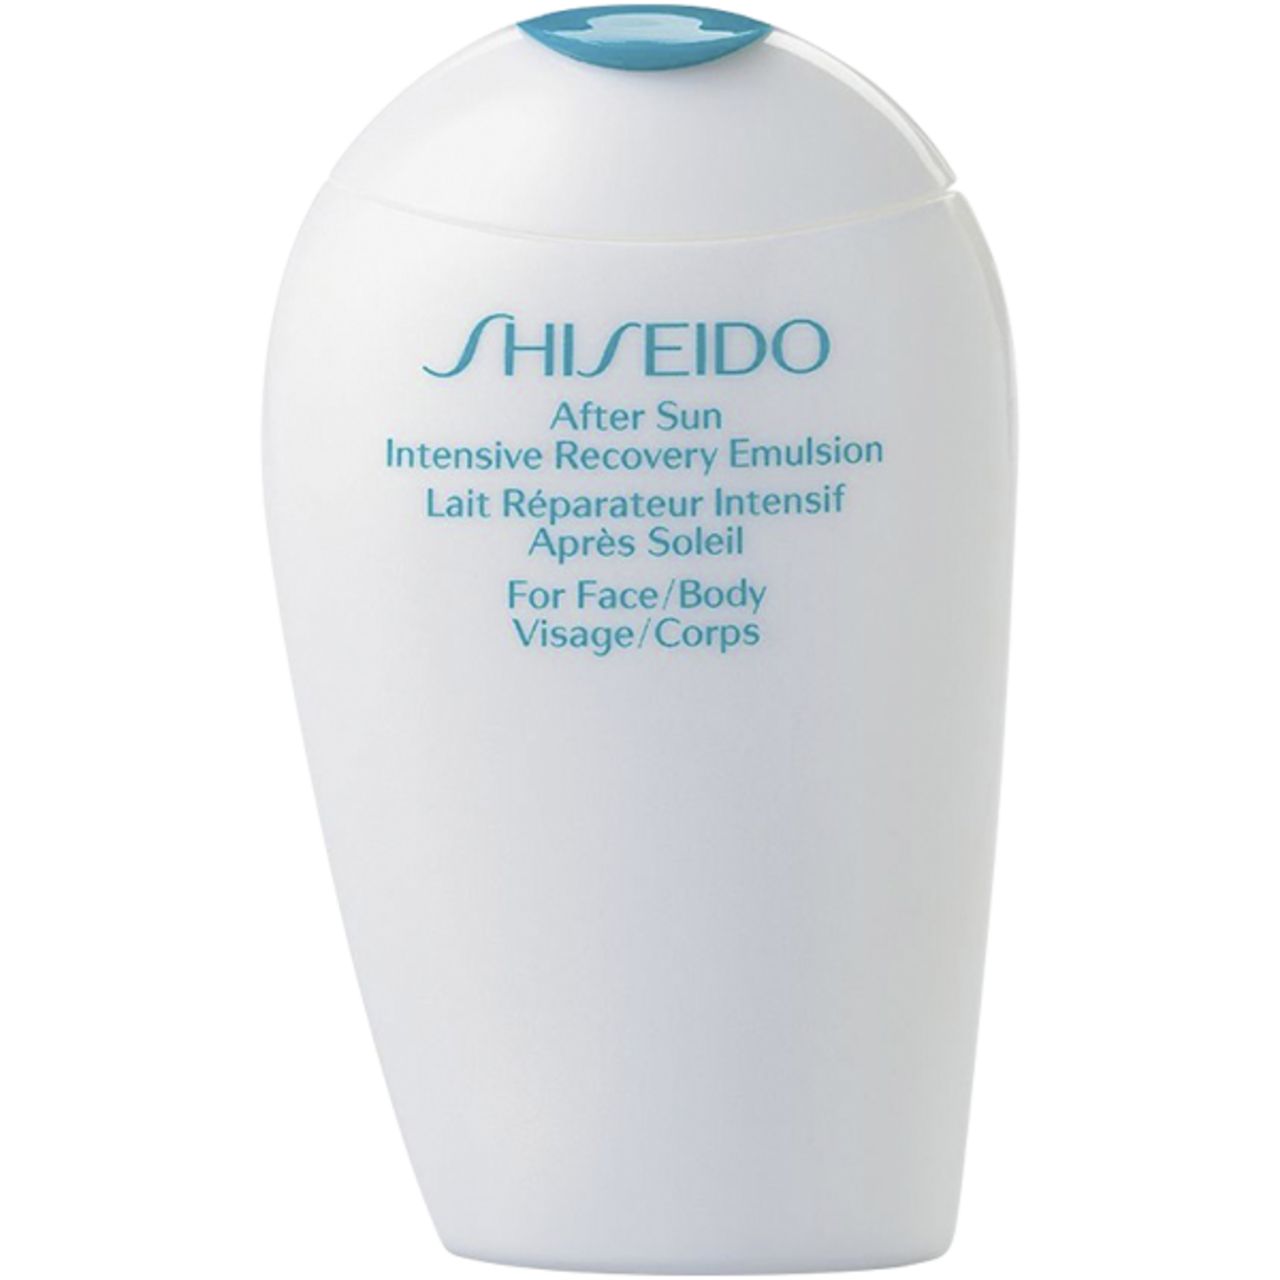 Shiseido, After Sun Intensive Recovery Emulsion